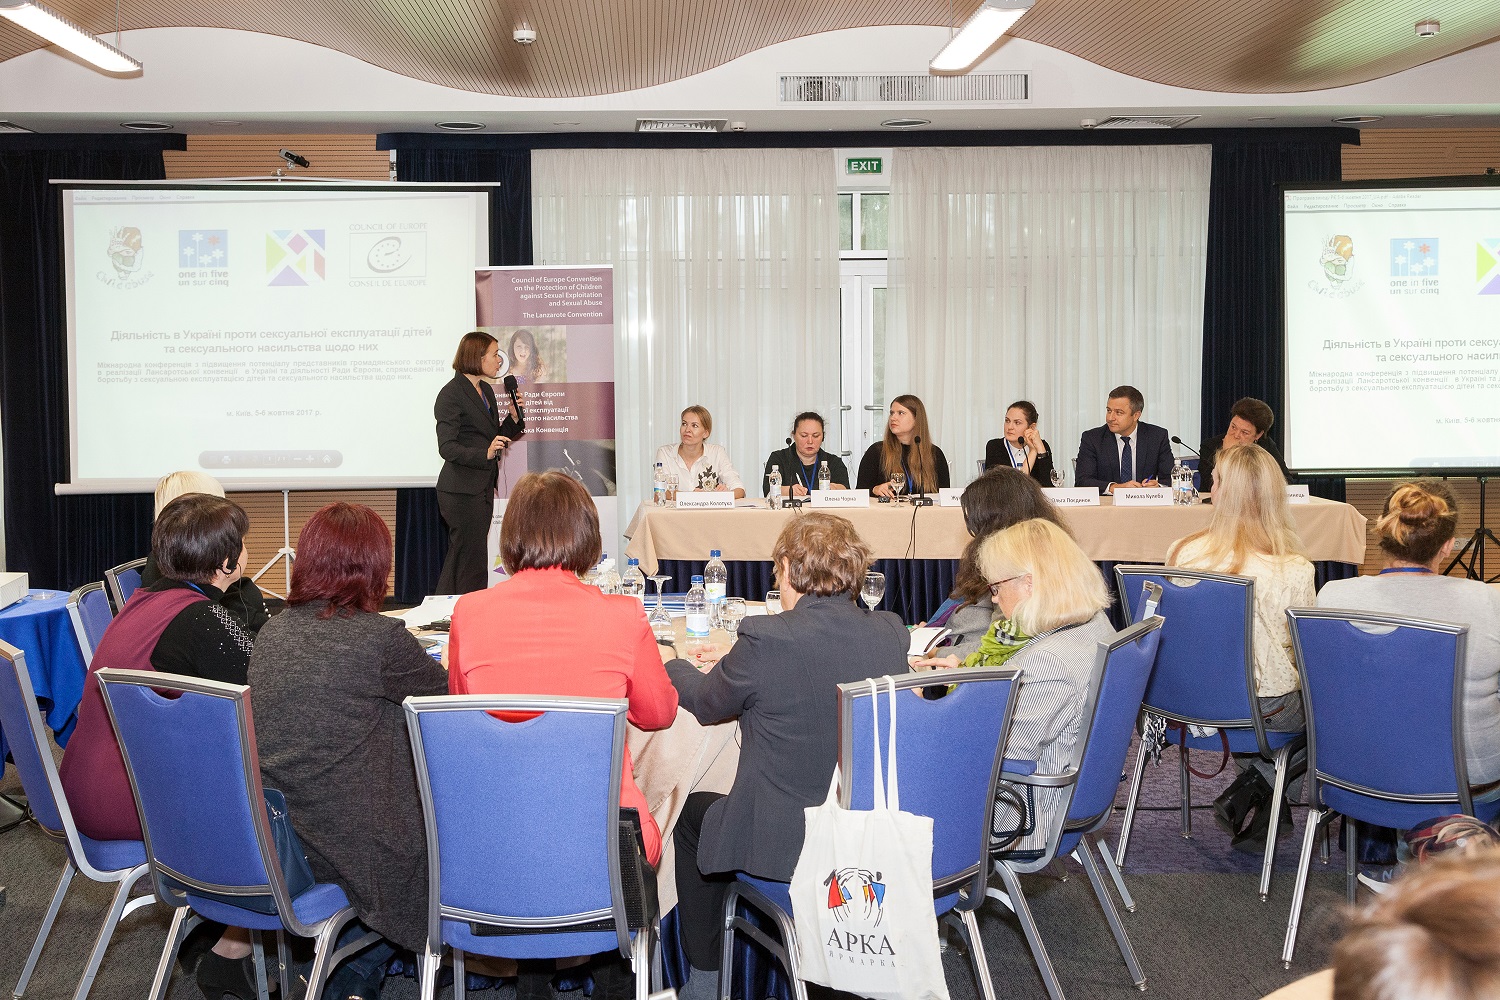 Capacity building workshop “Action against child sexual exploitation and abuse in Ukraine” organized for the civil society in Kiev